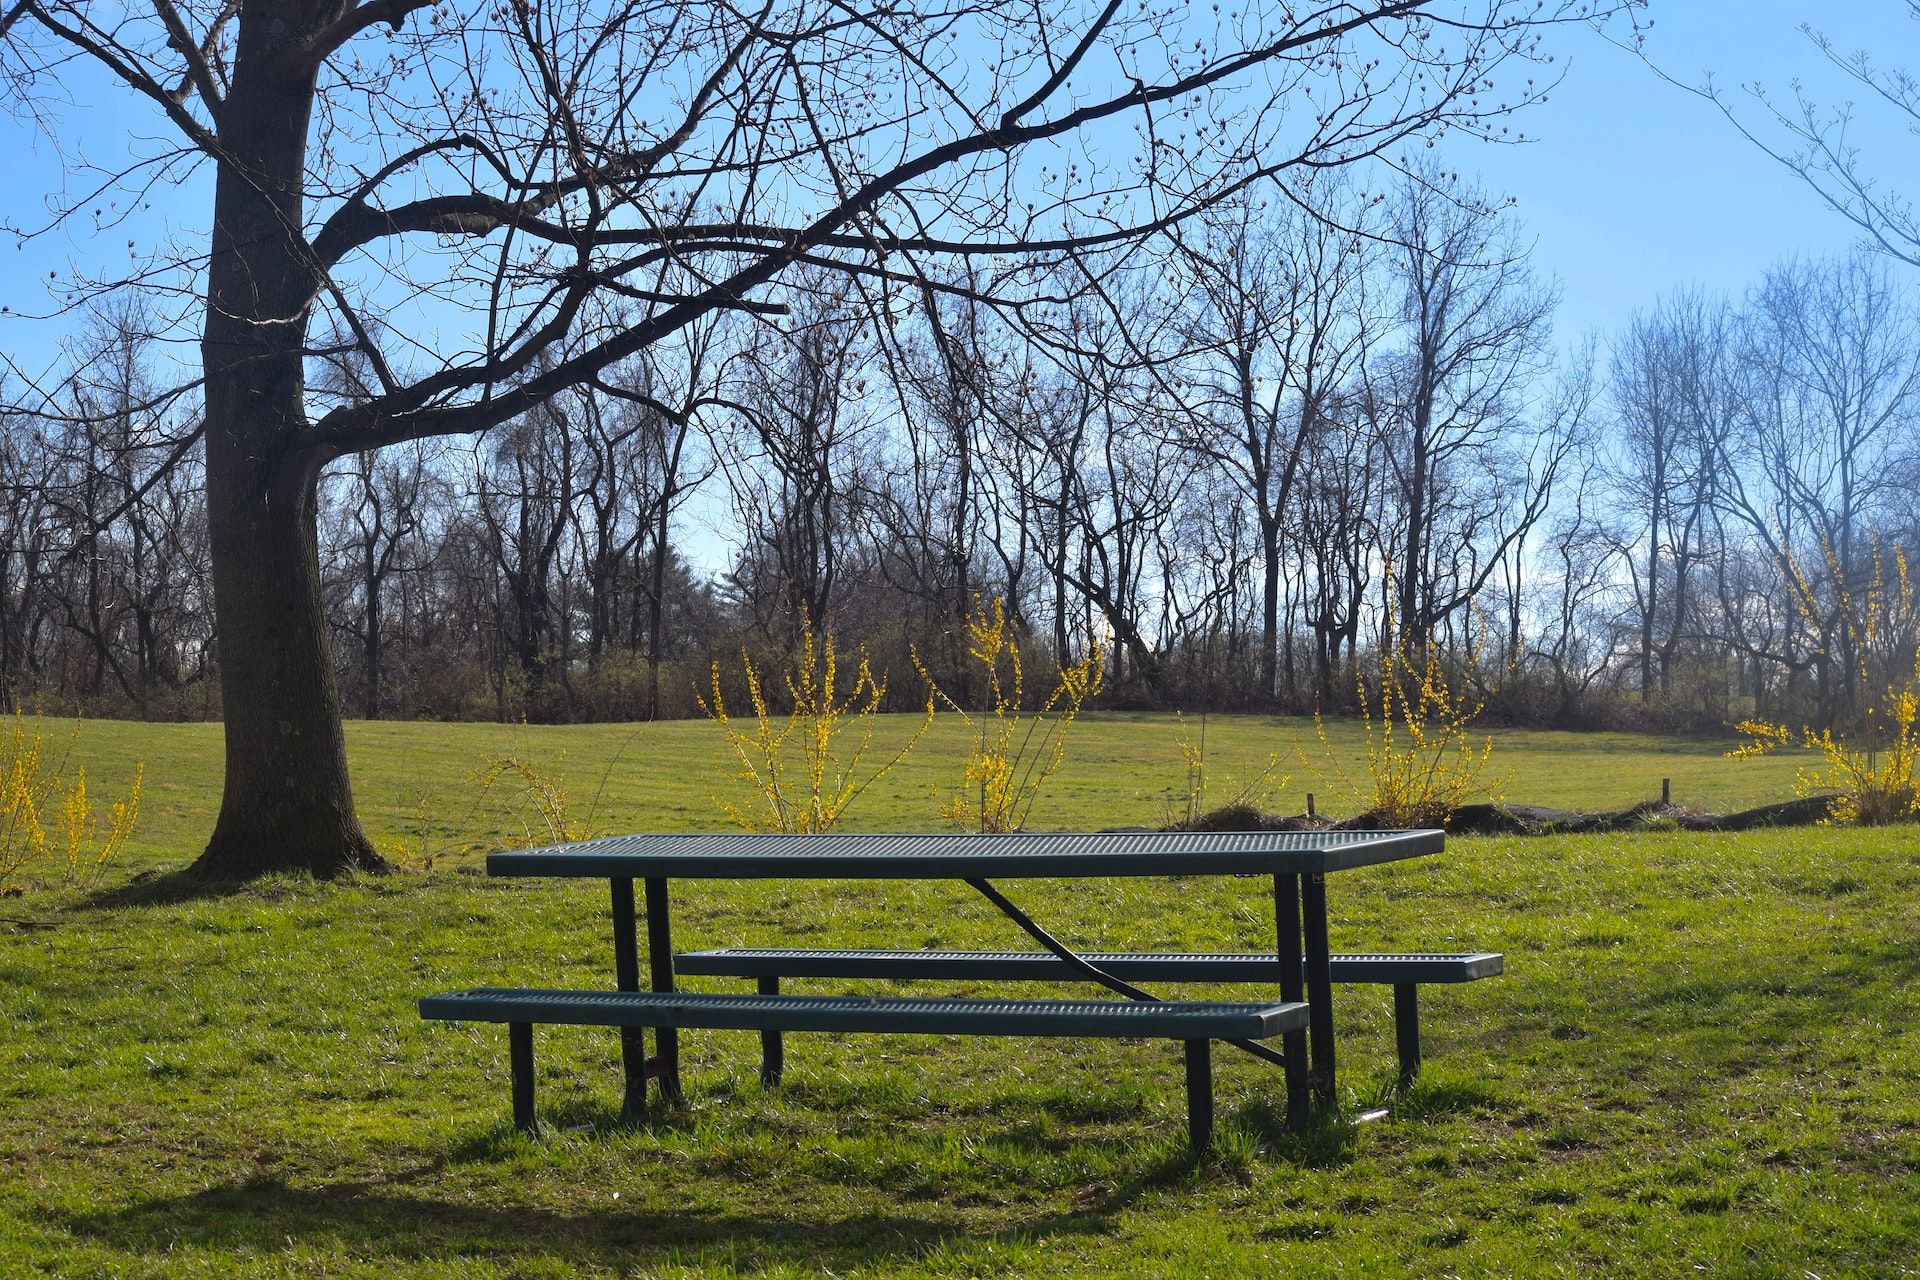 Enjoy an afternoon walk through one of Wilmington's many green spaces.